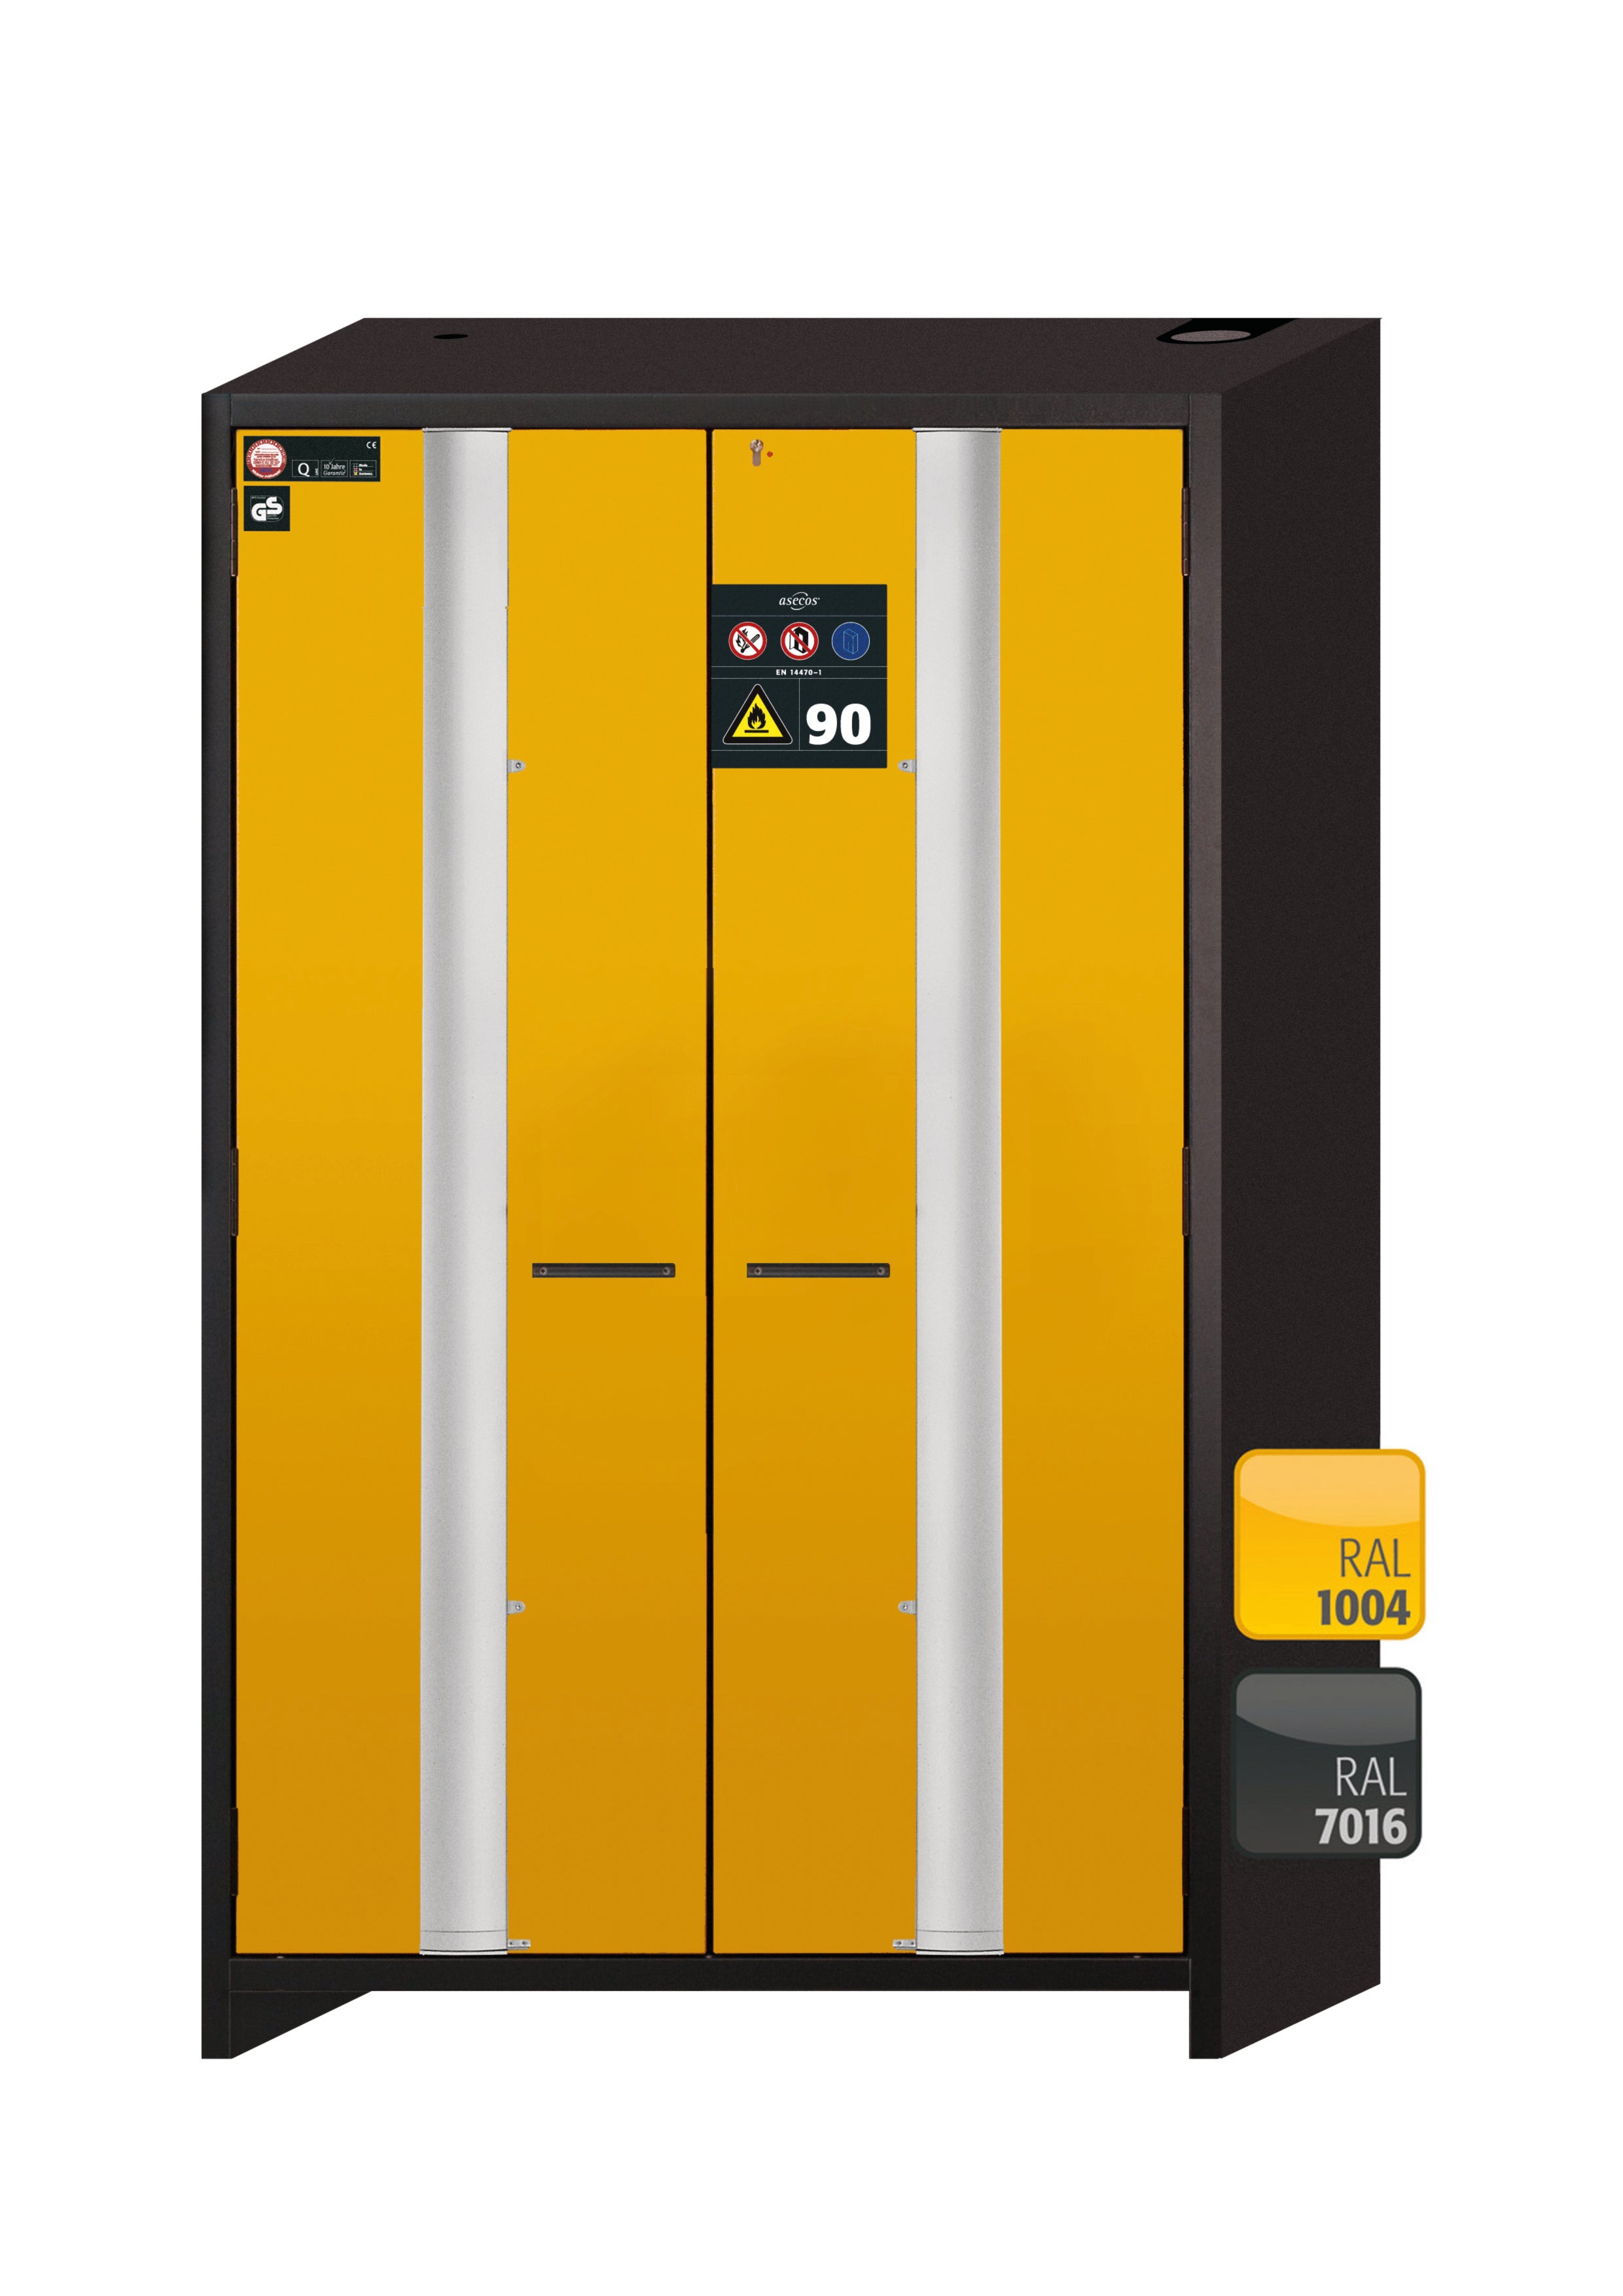 Type 90 safety cabinet Q-PHOENIX-90 model Q90.195.120.FD in safety yellow RAL 1004 with 2x standard pull-out tray (stainless steel 1.4301)